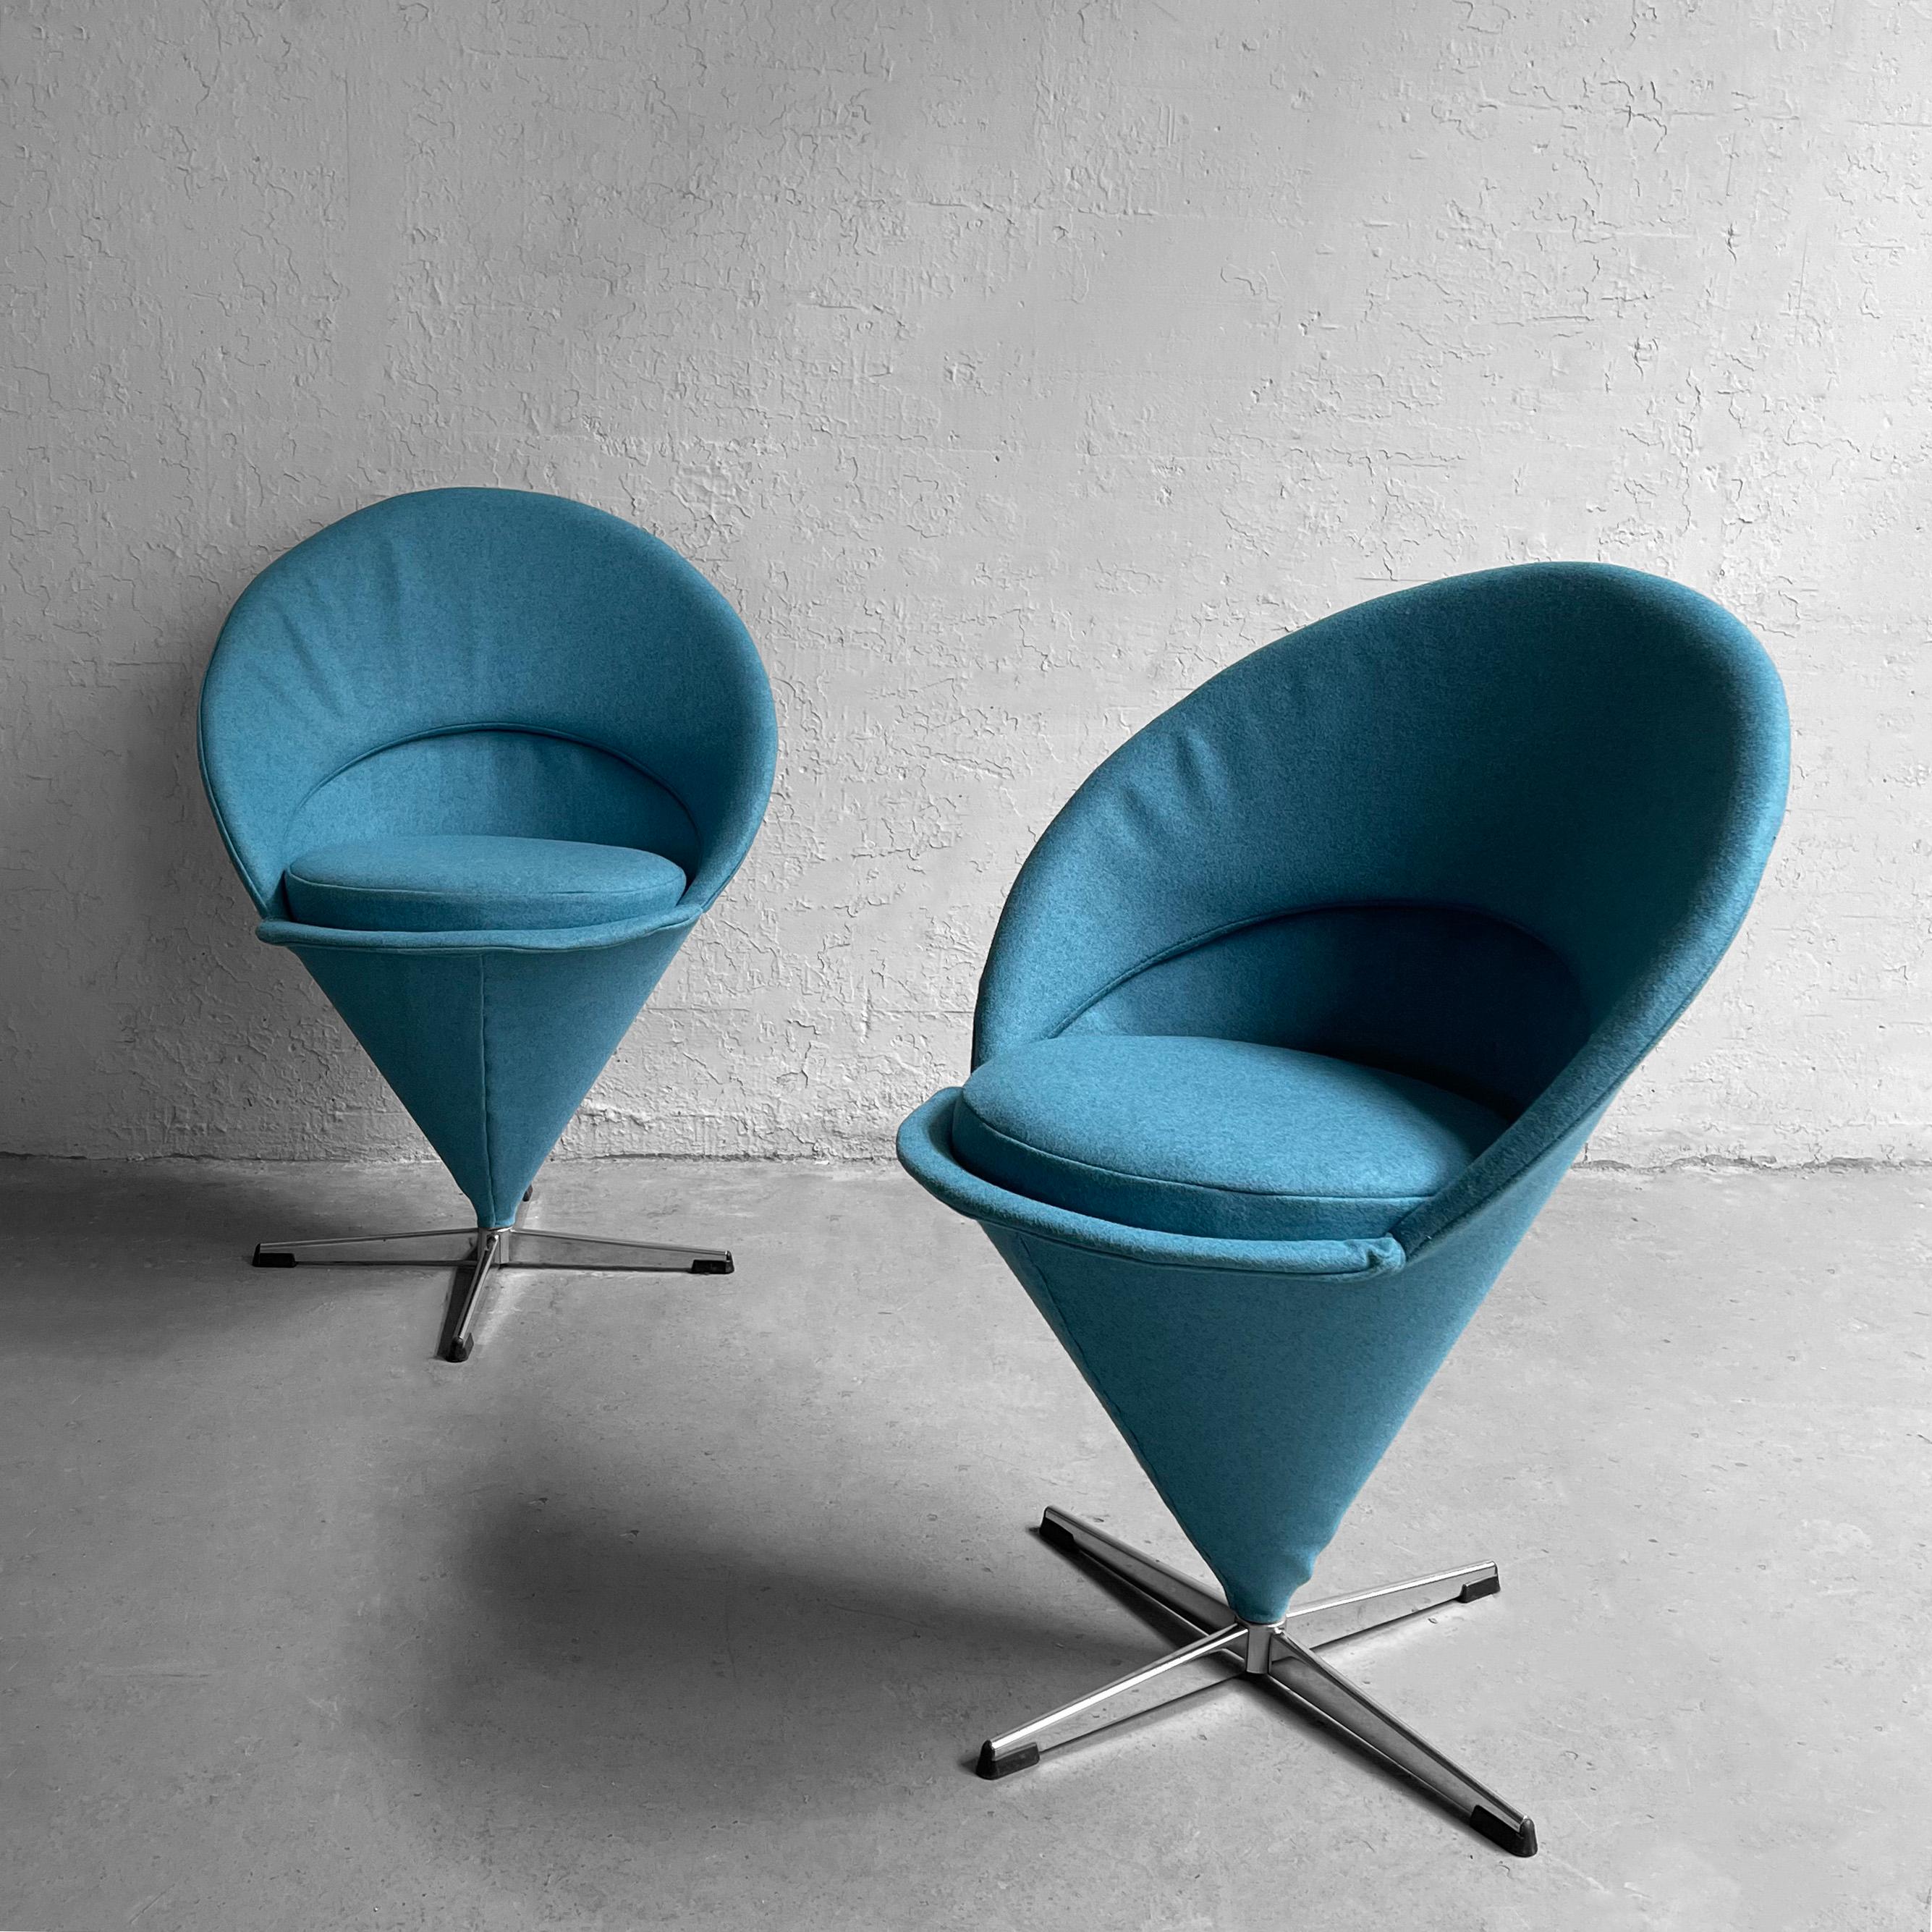 Pair of iconic, Mid-Century Modern, cone chairs by Verner Panton, circa 1960's, swivel on their steel 4 prong bases, upholstered in a playful robin's egg blue, wool blend.